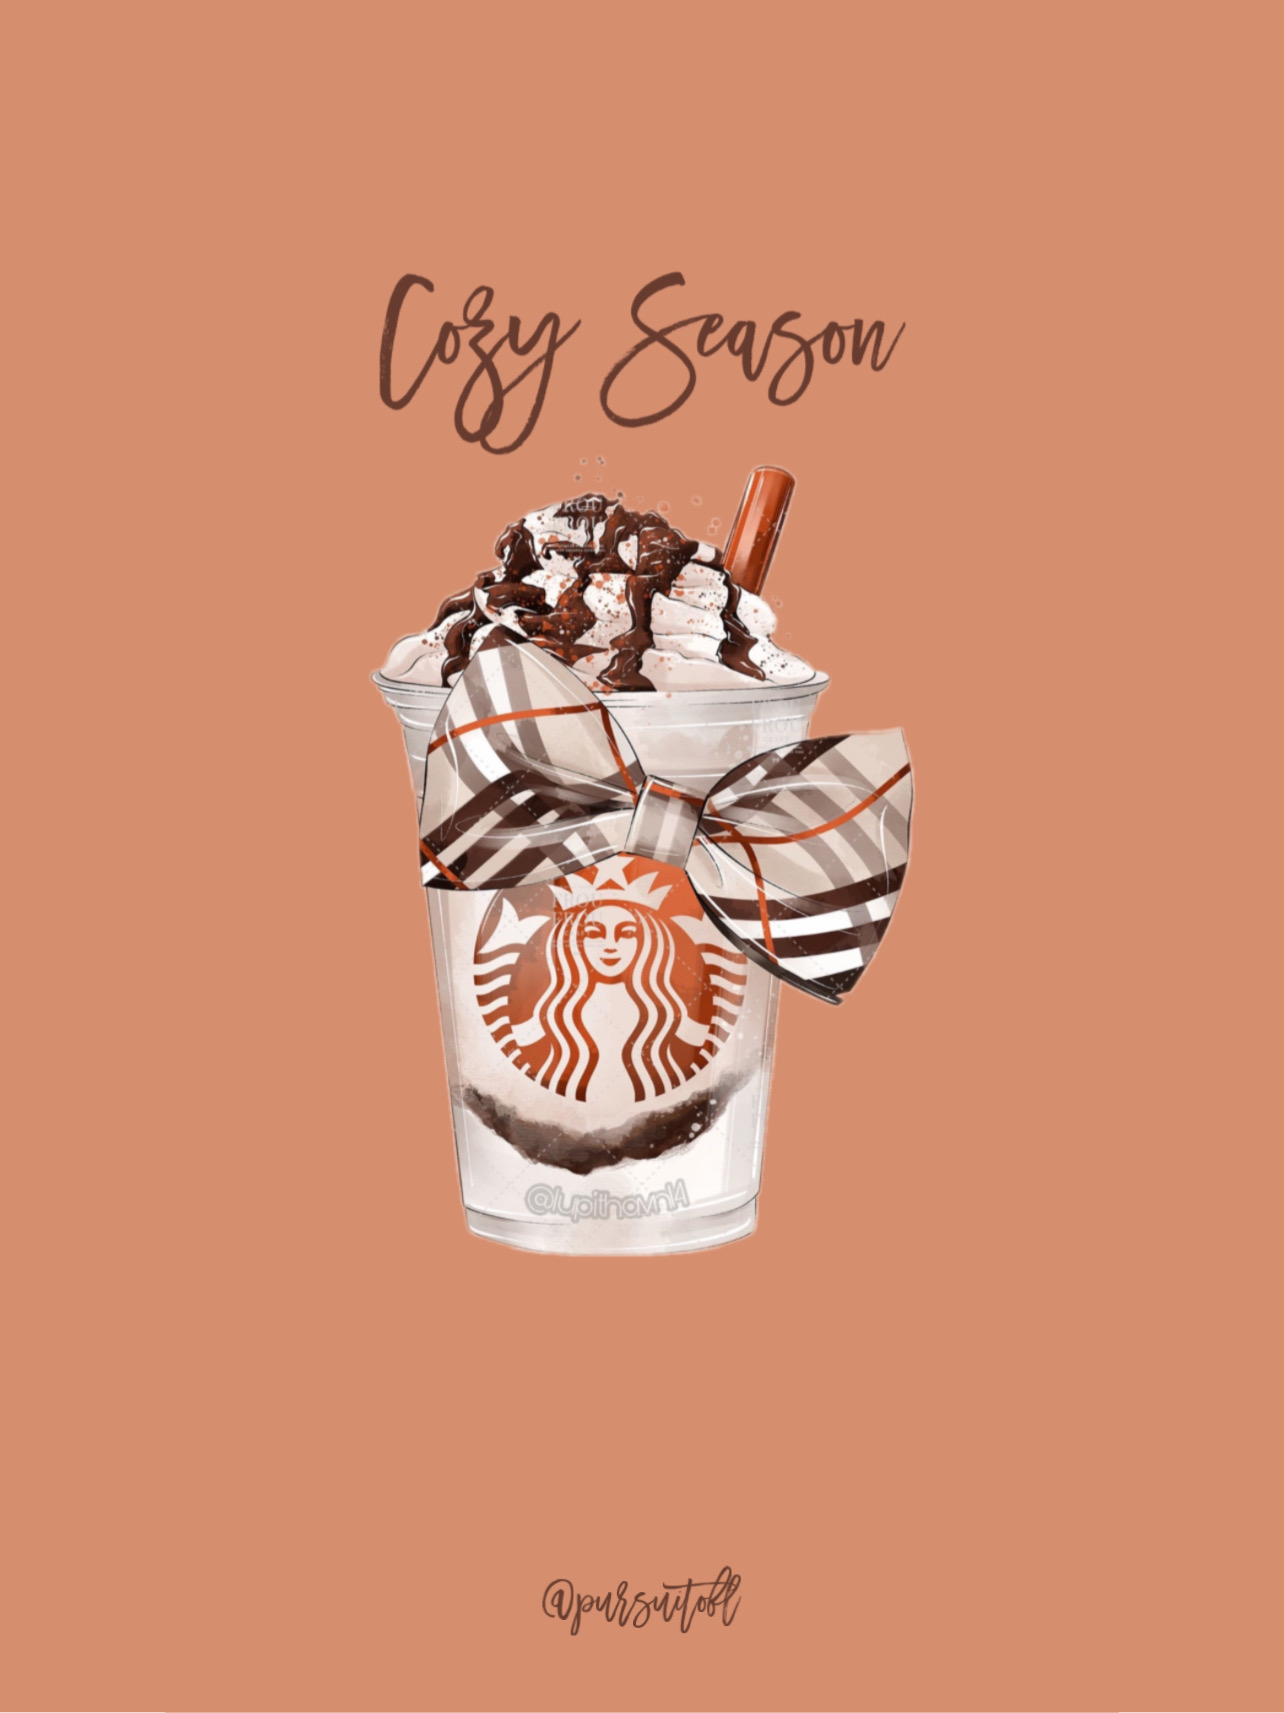 Orange fall tablet wallpaper with Starbucks drink and brown plaid bow and brown cozy season text